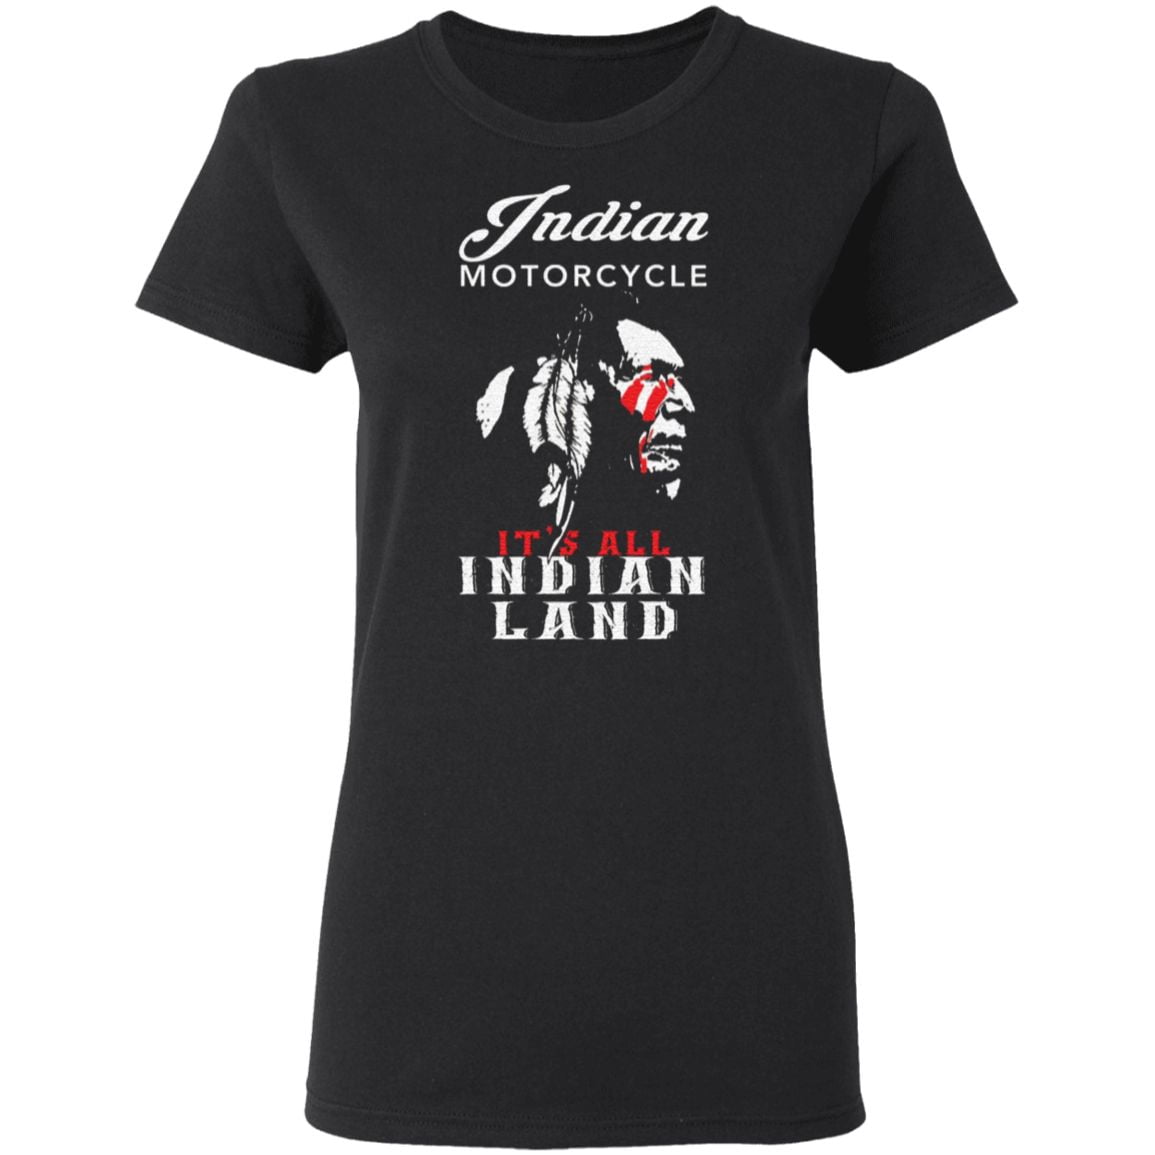 Indian Motorcycle It’s All Indian Land shirt